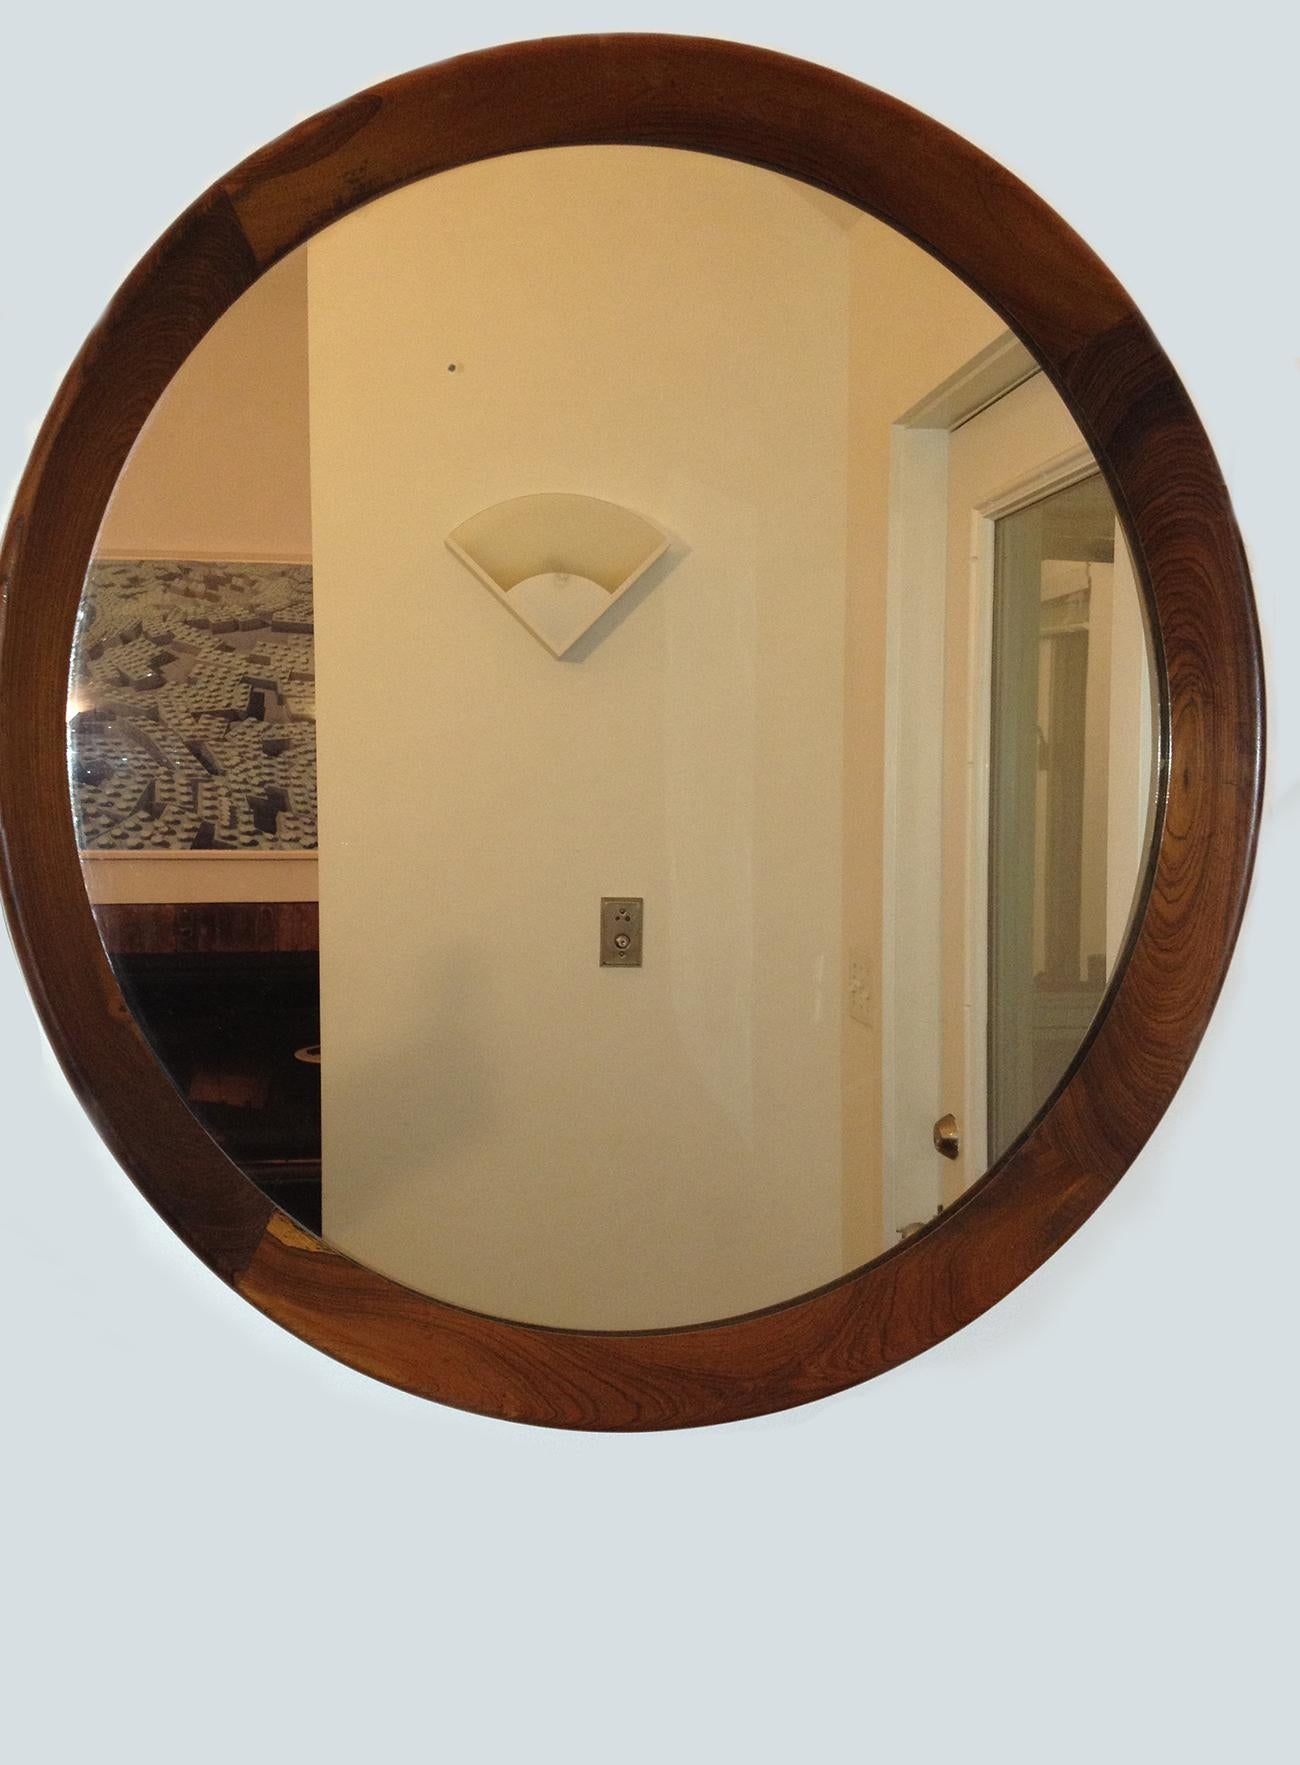 Round Grasselli mirror with wood frame. Designed by Sergio Rodrigues, Brazil, circa 1960.